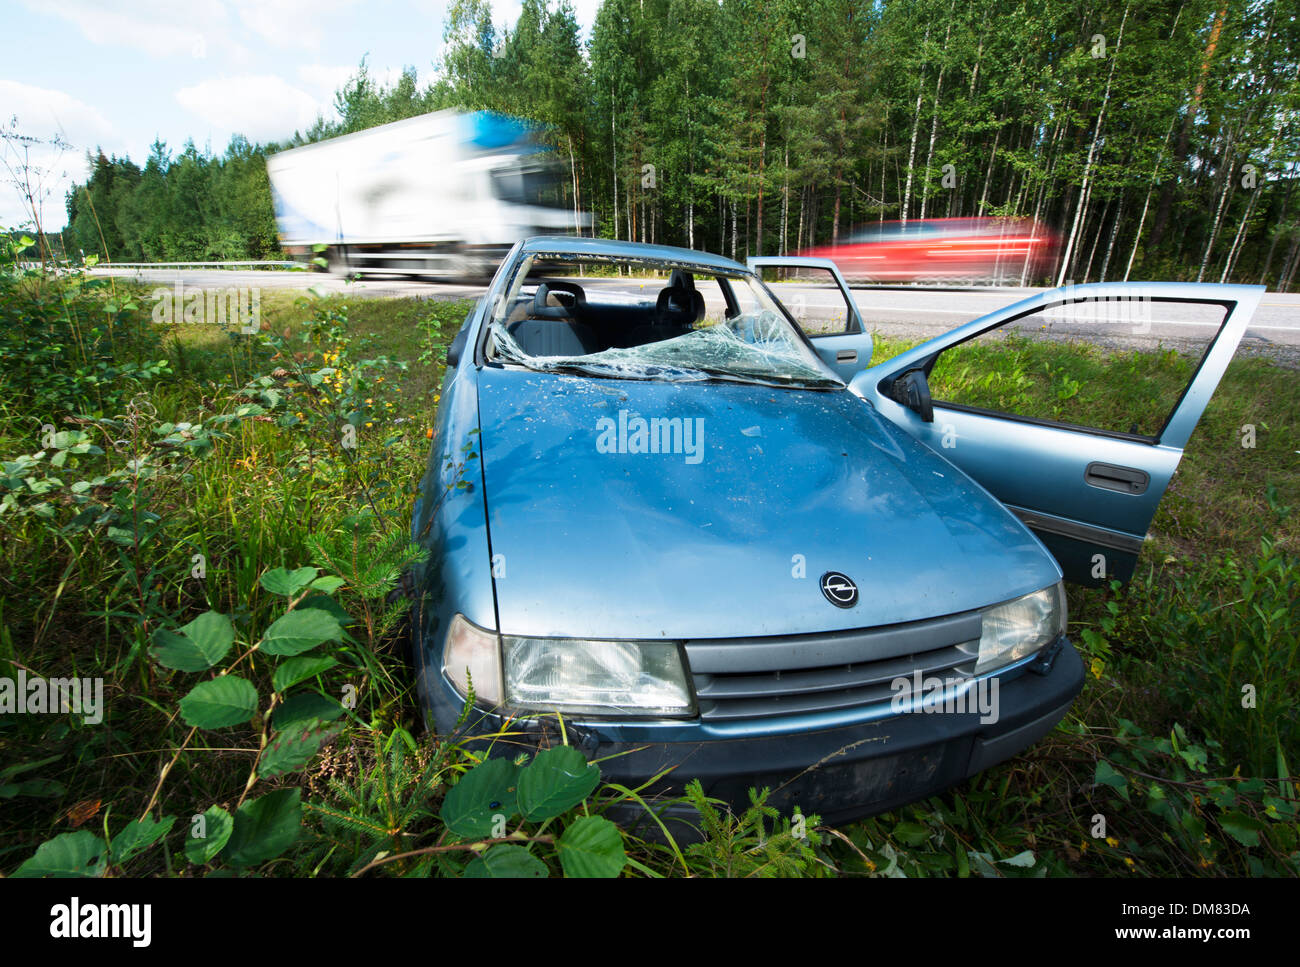 Wrecked car on the side of a road after an accident Stock Photo